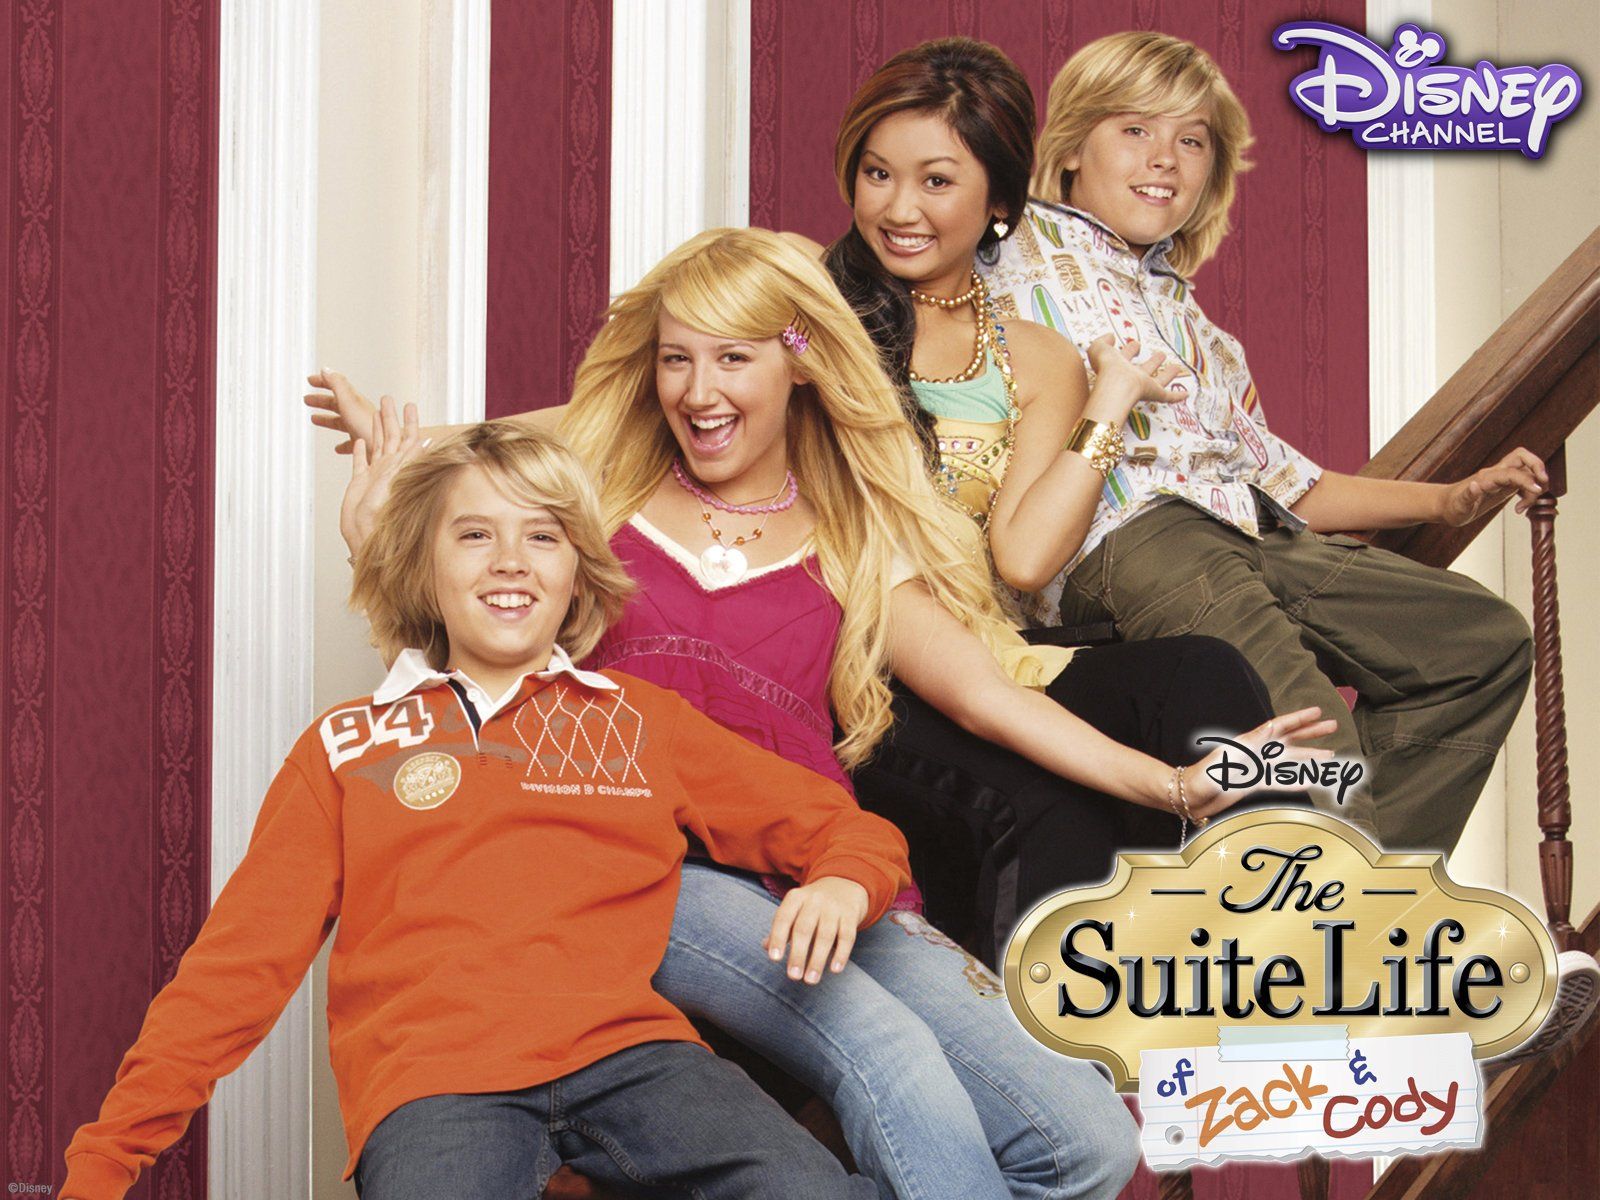 Zack And Cody Wallpapers - Wallpaper Cave